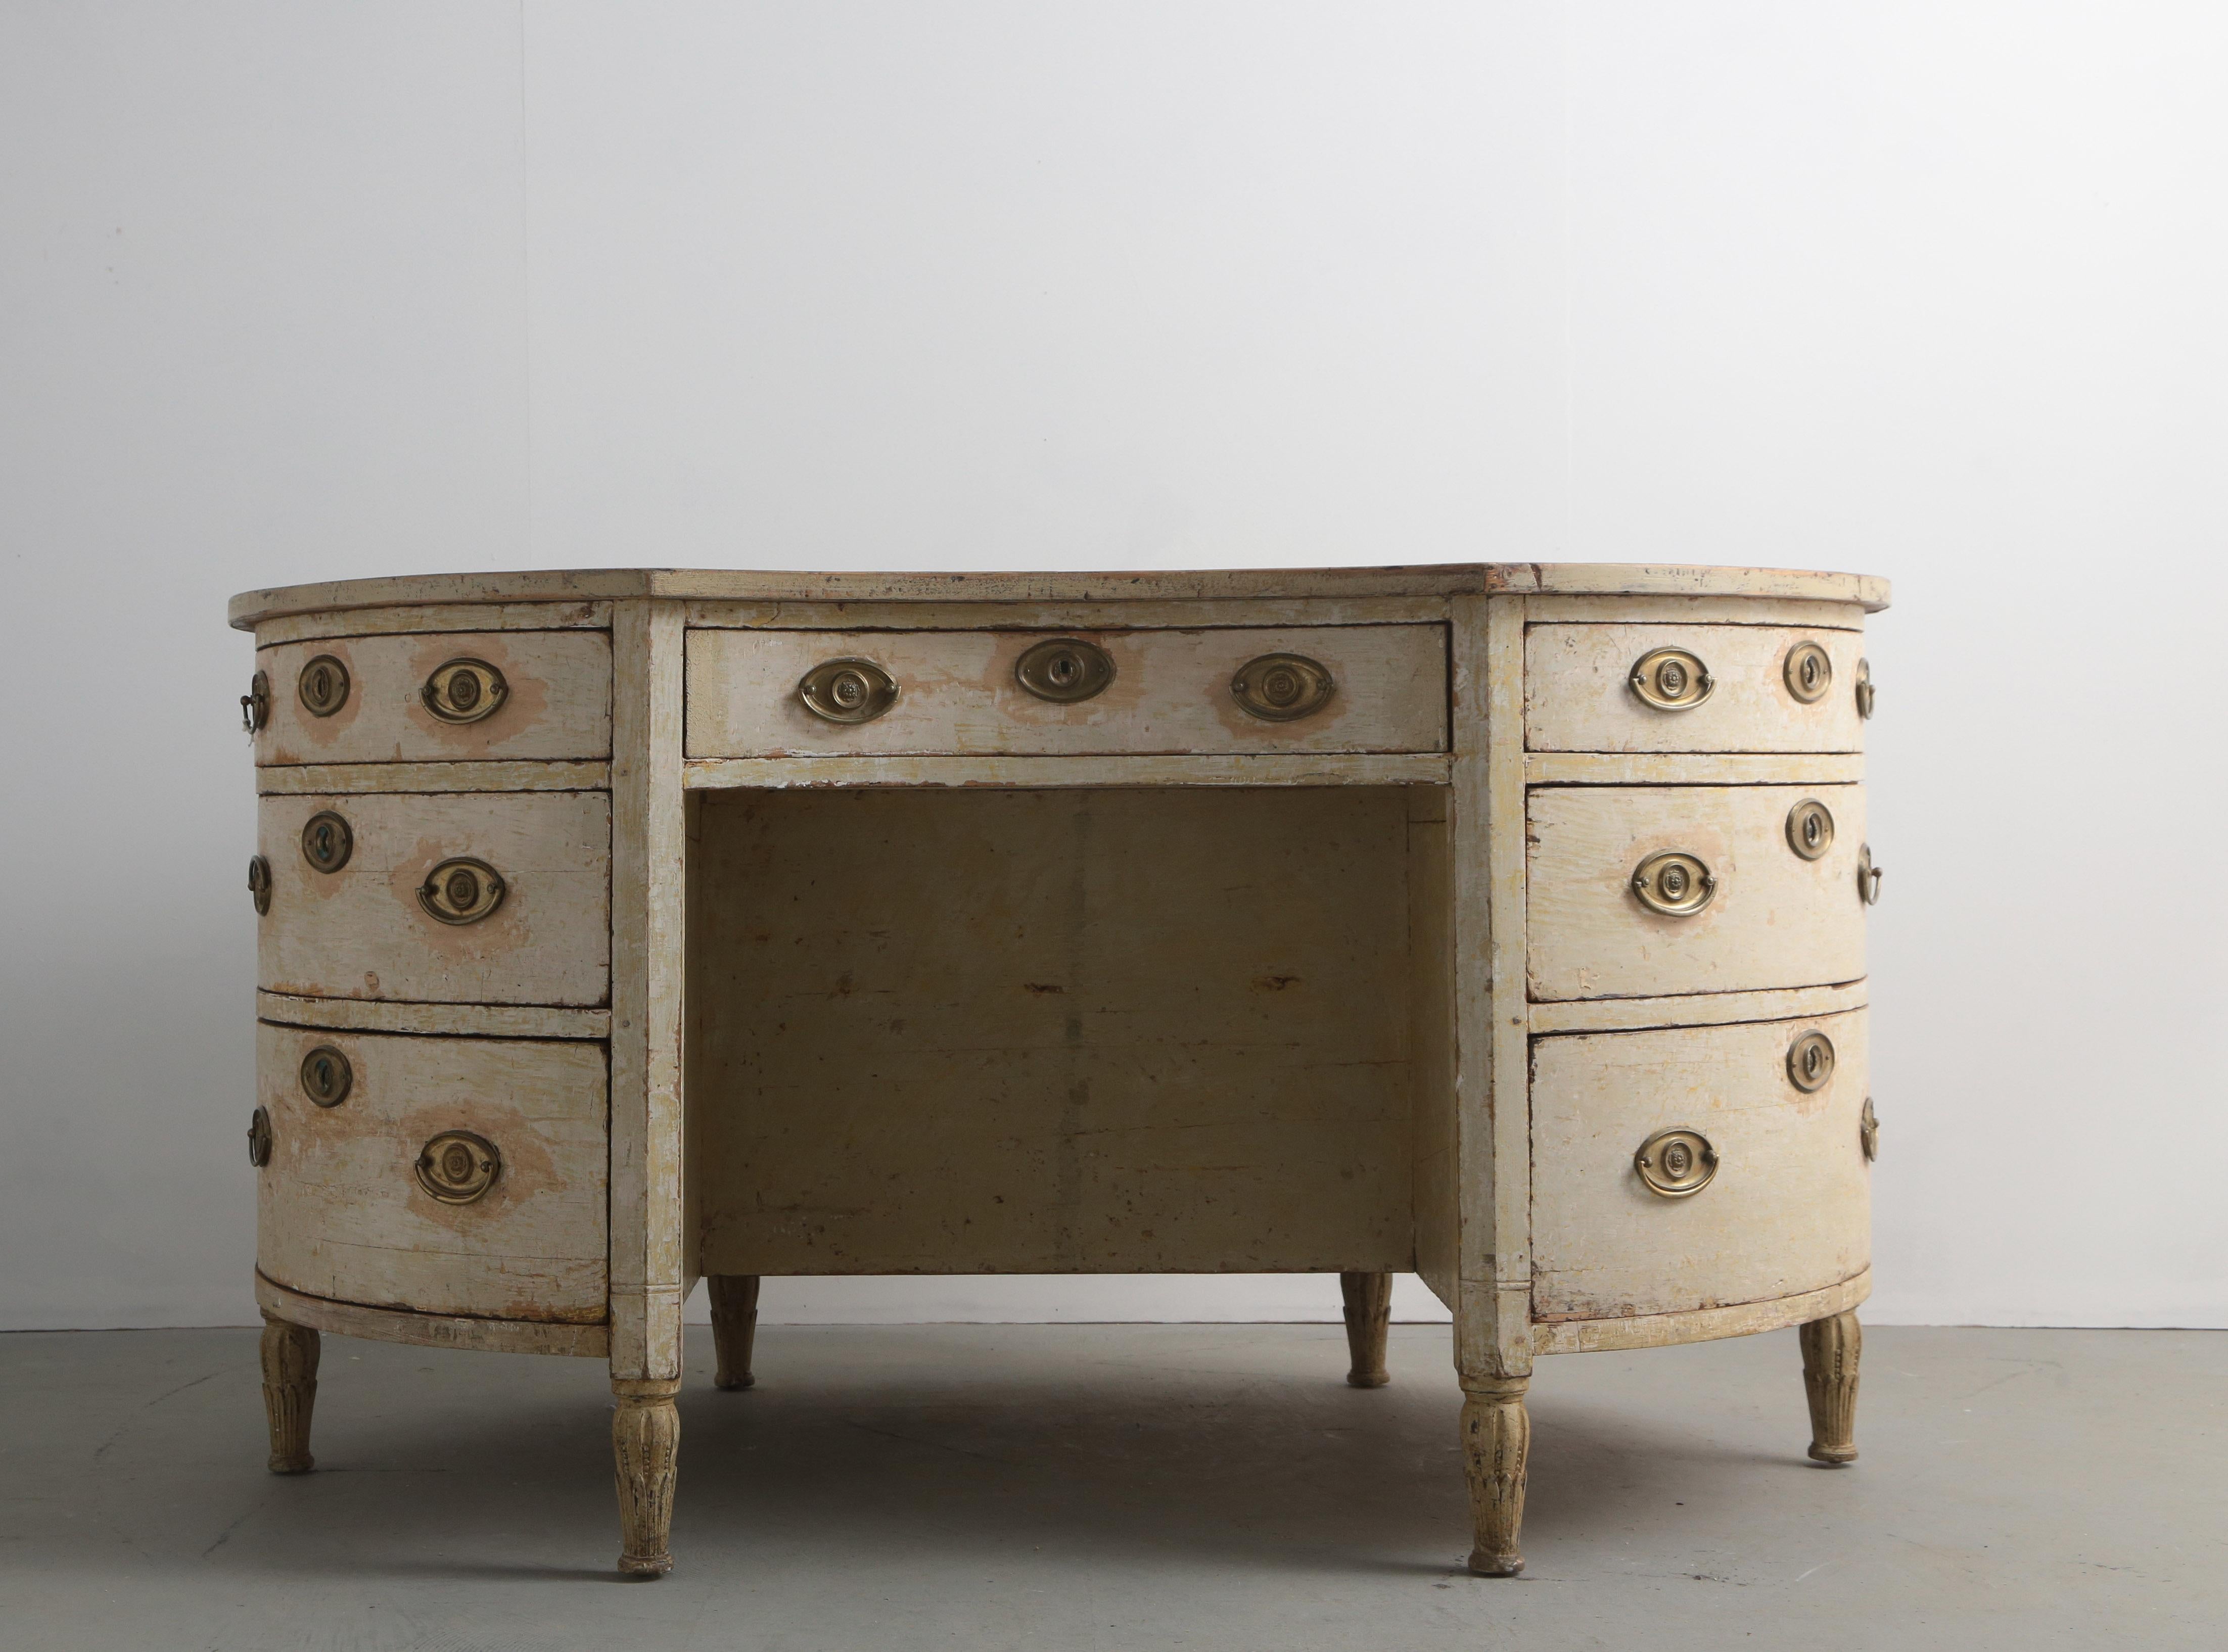 An early 19th century Swedish curved desk with drawers front and back. Original paintwork with a Shagreen covered top.